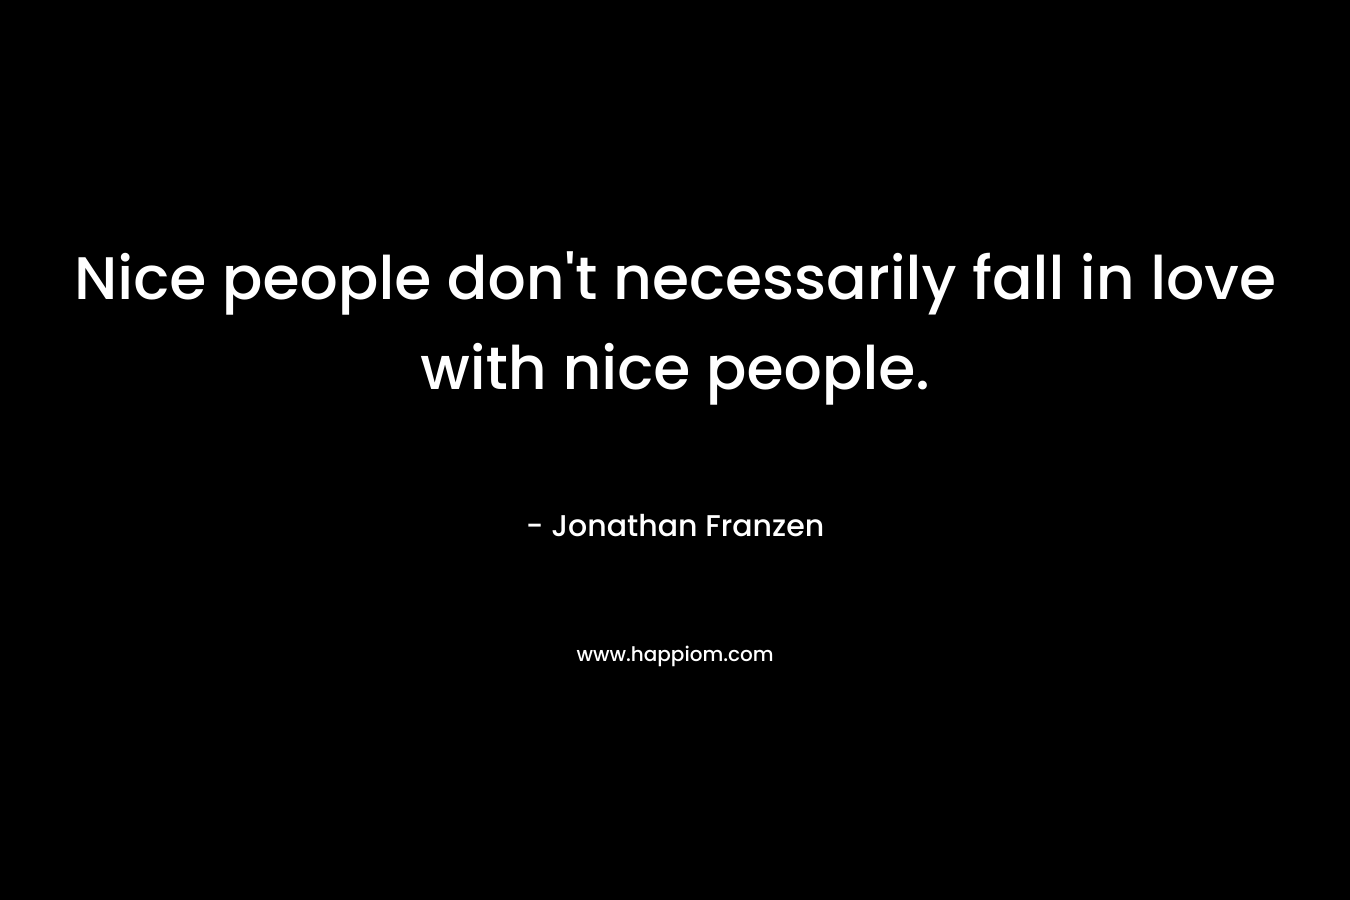 Nice people don't necessarily fall in love with nice people.